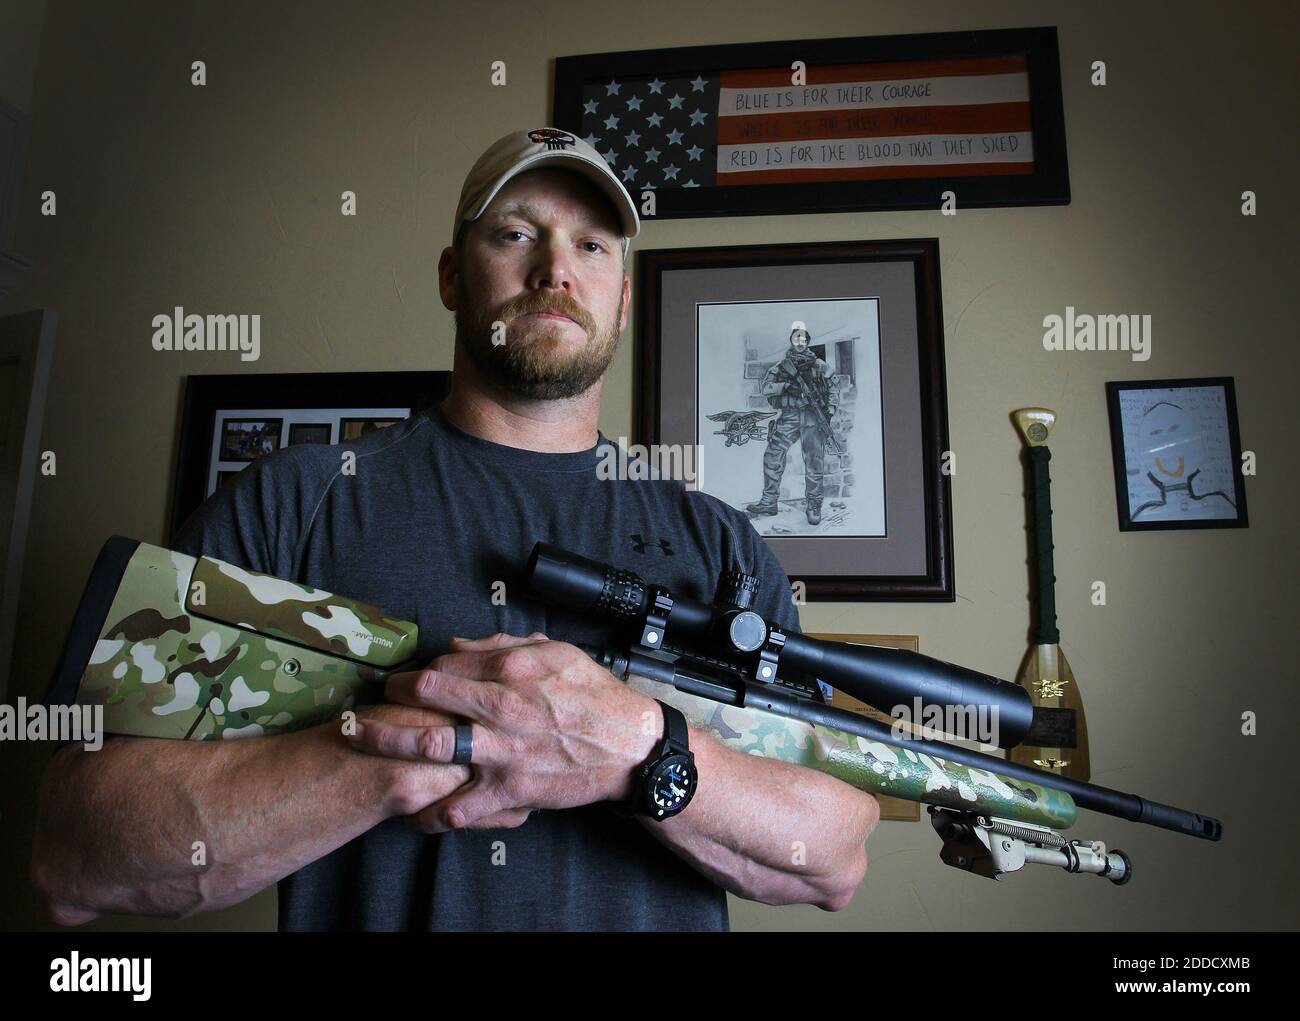 NO FILM, NO VIDEO, NO TV, NO DOCUMENTARY - Chris Kyle, a retired Navy SEAL and bestselling author of the book 'American Sniper: The Autobiography of the Most Lethal Sniper in U.S. Military History', holds a .308 sniper rifle in this April 6, 2012, file photo. Kyle was one of two people reported killed on the gun range at Rough Creek Lodge near Glen Rose, Texas, Saturday, February 2 2013. Photo by Paul Moseley/Fort Worth Star-Telegram/MCT/ABACAPRESS.COM Stock Photo